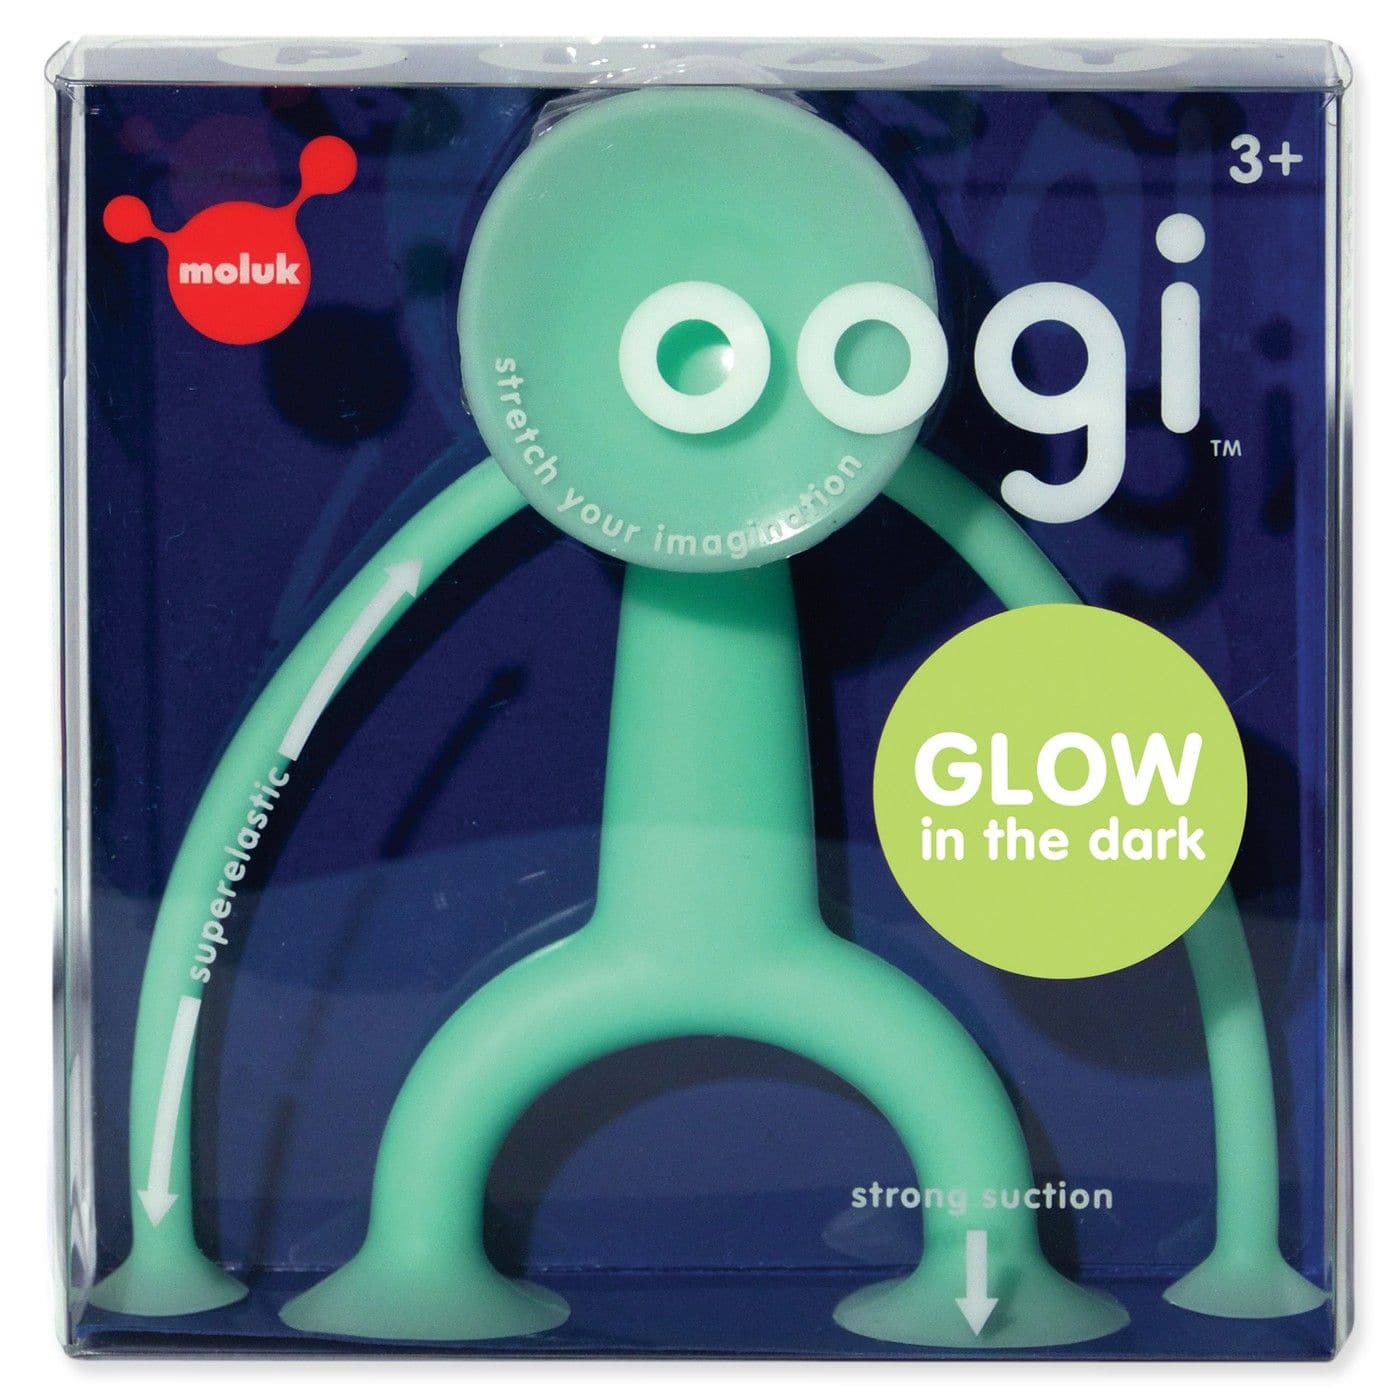 Bendy Oogi Glow In the Dark, Bendy Oogi Glow In the Dark figures are an irresistibly tactile and wonderfully expressive new figure toy, and now they GLOW IN THE DARK!! With suction cup head, hands and feet, and long stretchy arms, they connect to any smooth surface. The Bendy Oogi Glow In the Dark are very social beings: They love to touch, embrace, form chains and do crazy acrobatic tricks. Their favourite hobbies are Oogi Yoga, extreme climbing or darting onto windows and other targets. Oogis are at home 